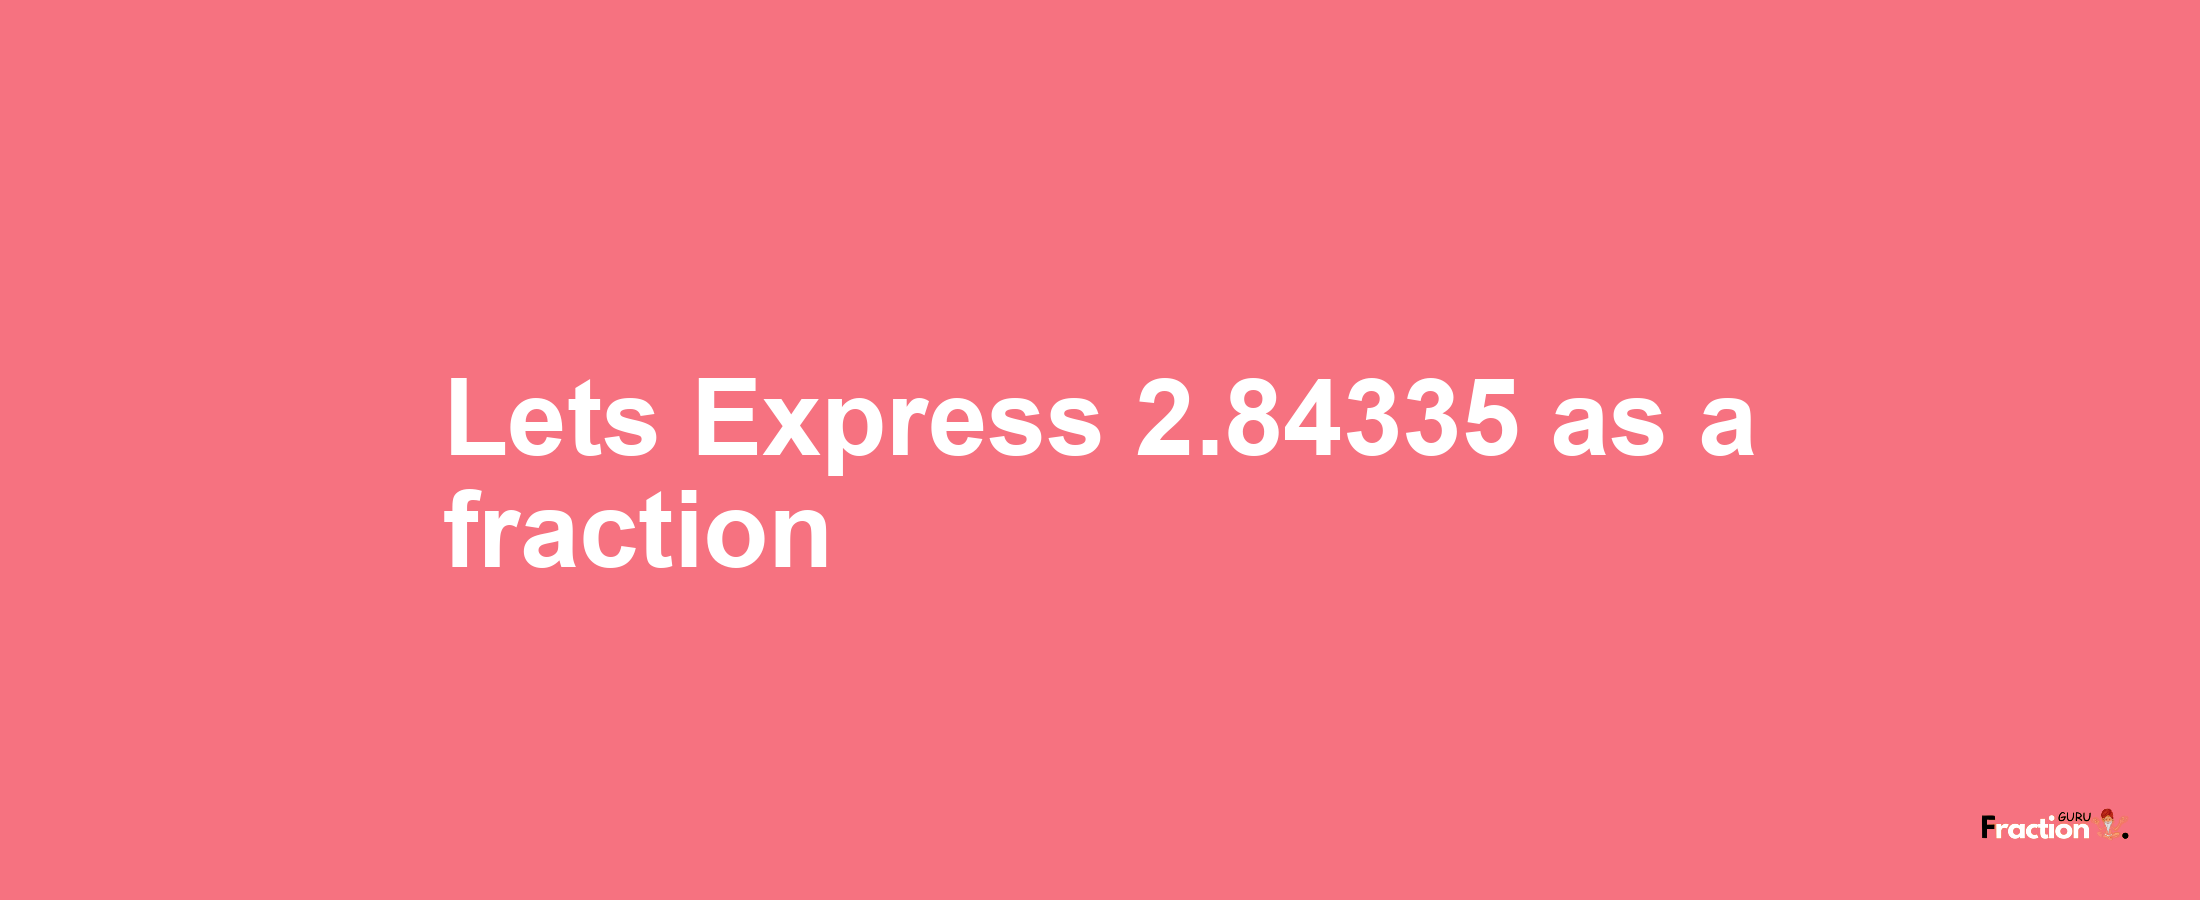 Lets Express 2.84335 as afraction